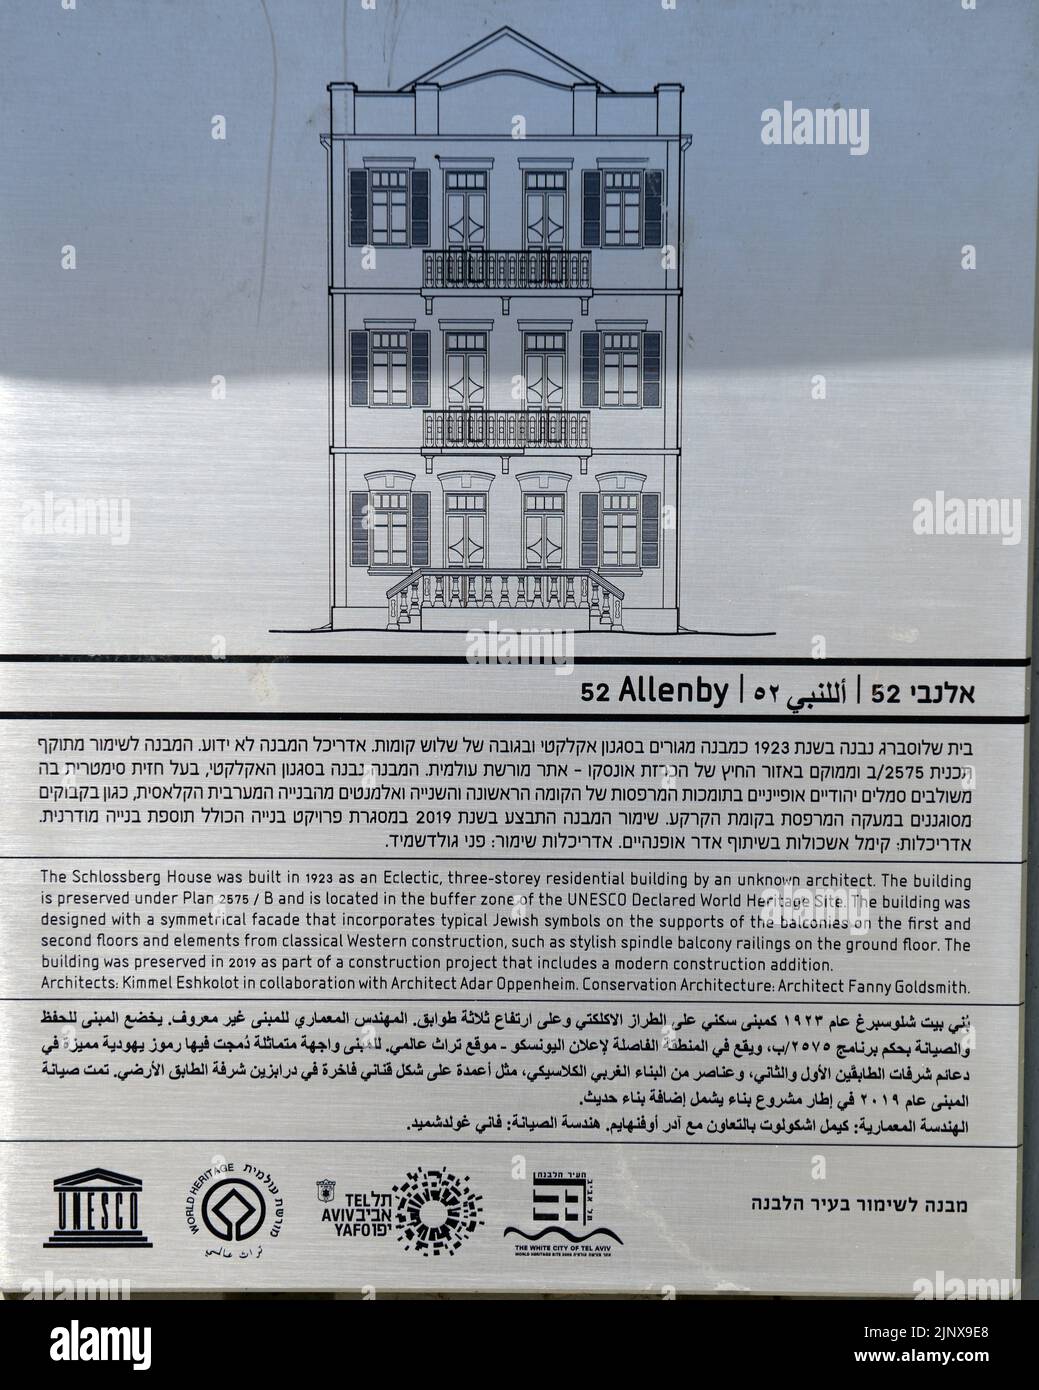 An explanation sign about the historical Schlossberg house on Allenby 52 St in Tel-Aviv, Israel. Stock Photo